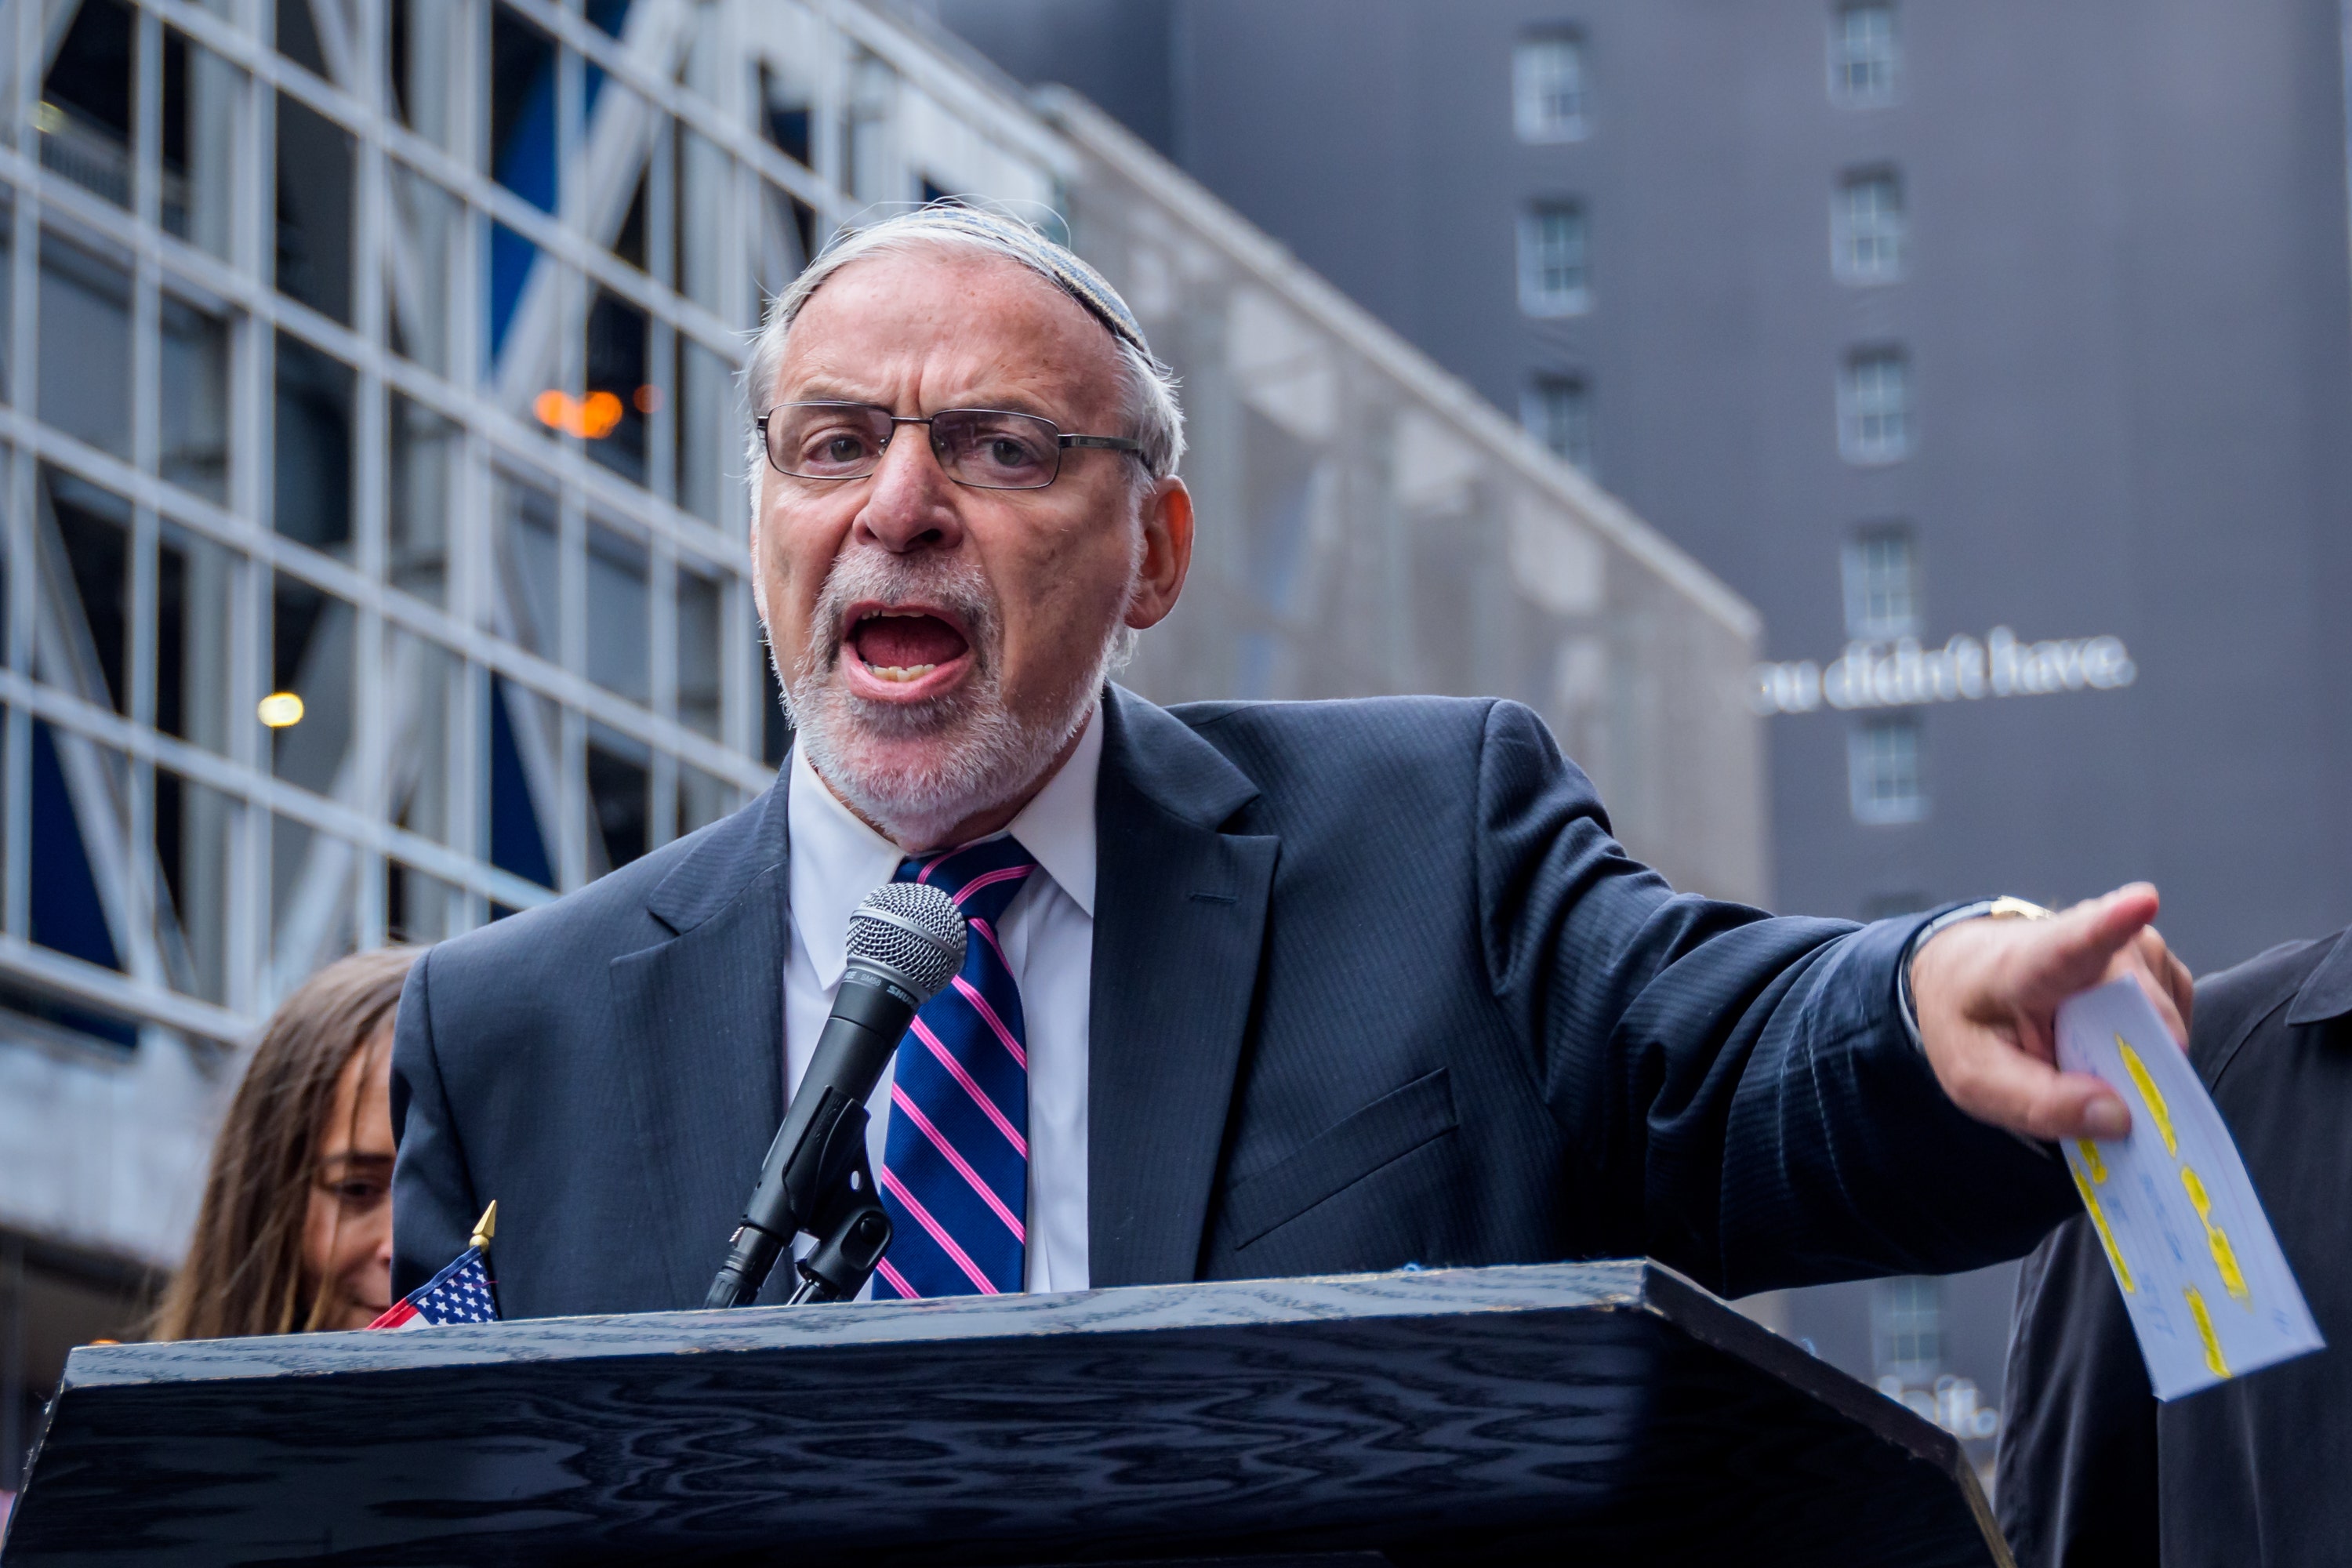 Dov Hikind, a lifelong Democrat who served for 36 years in the New York State Assembly and later founded the group Americans Against Antisemitism, is now joining the Republican Party.